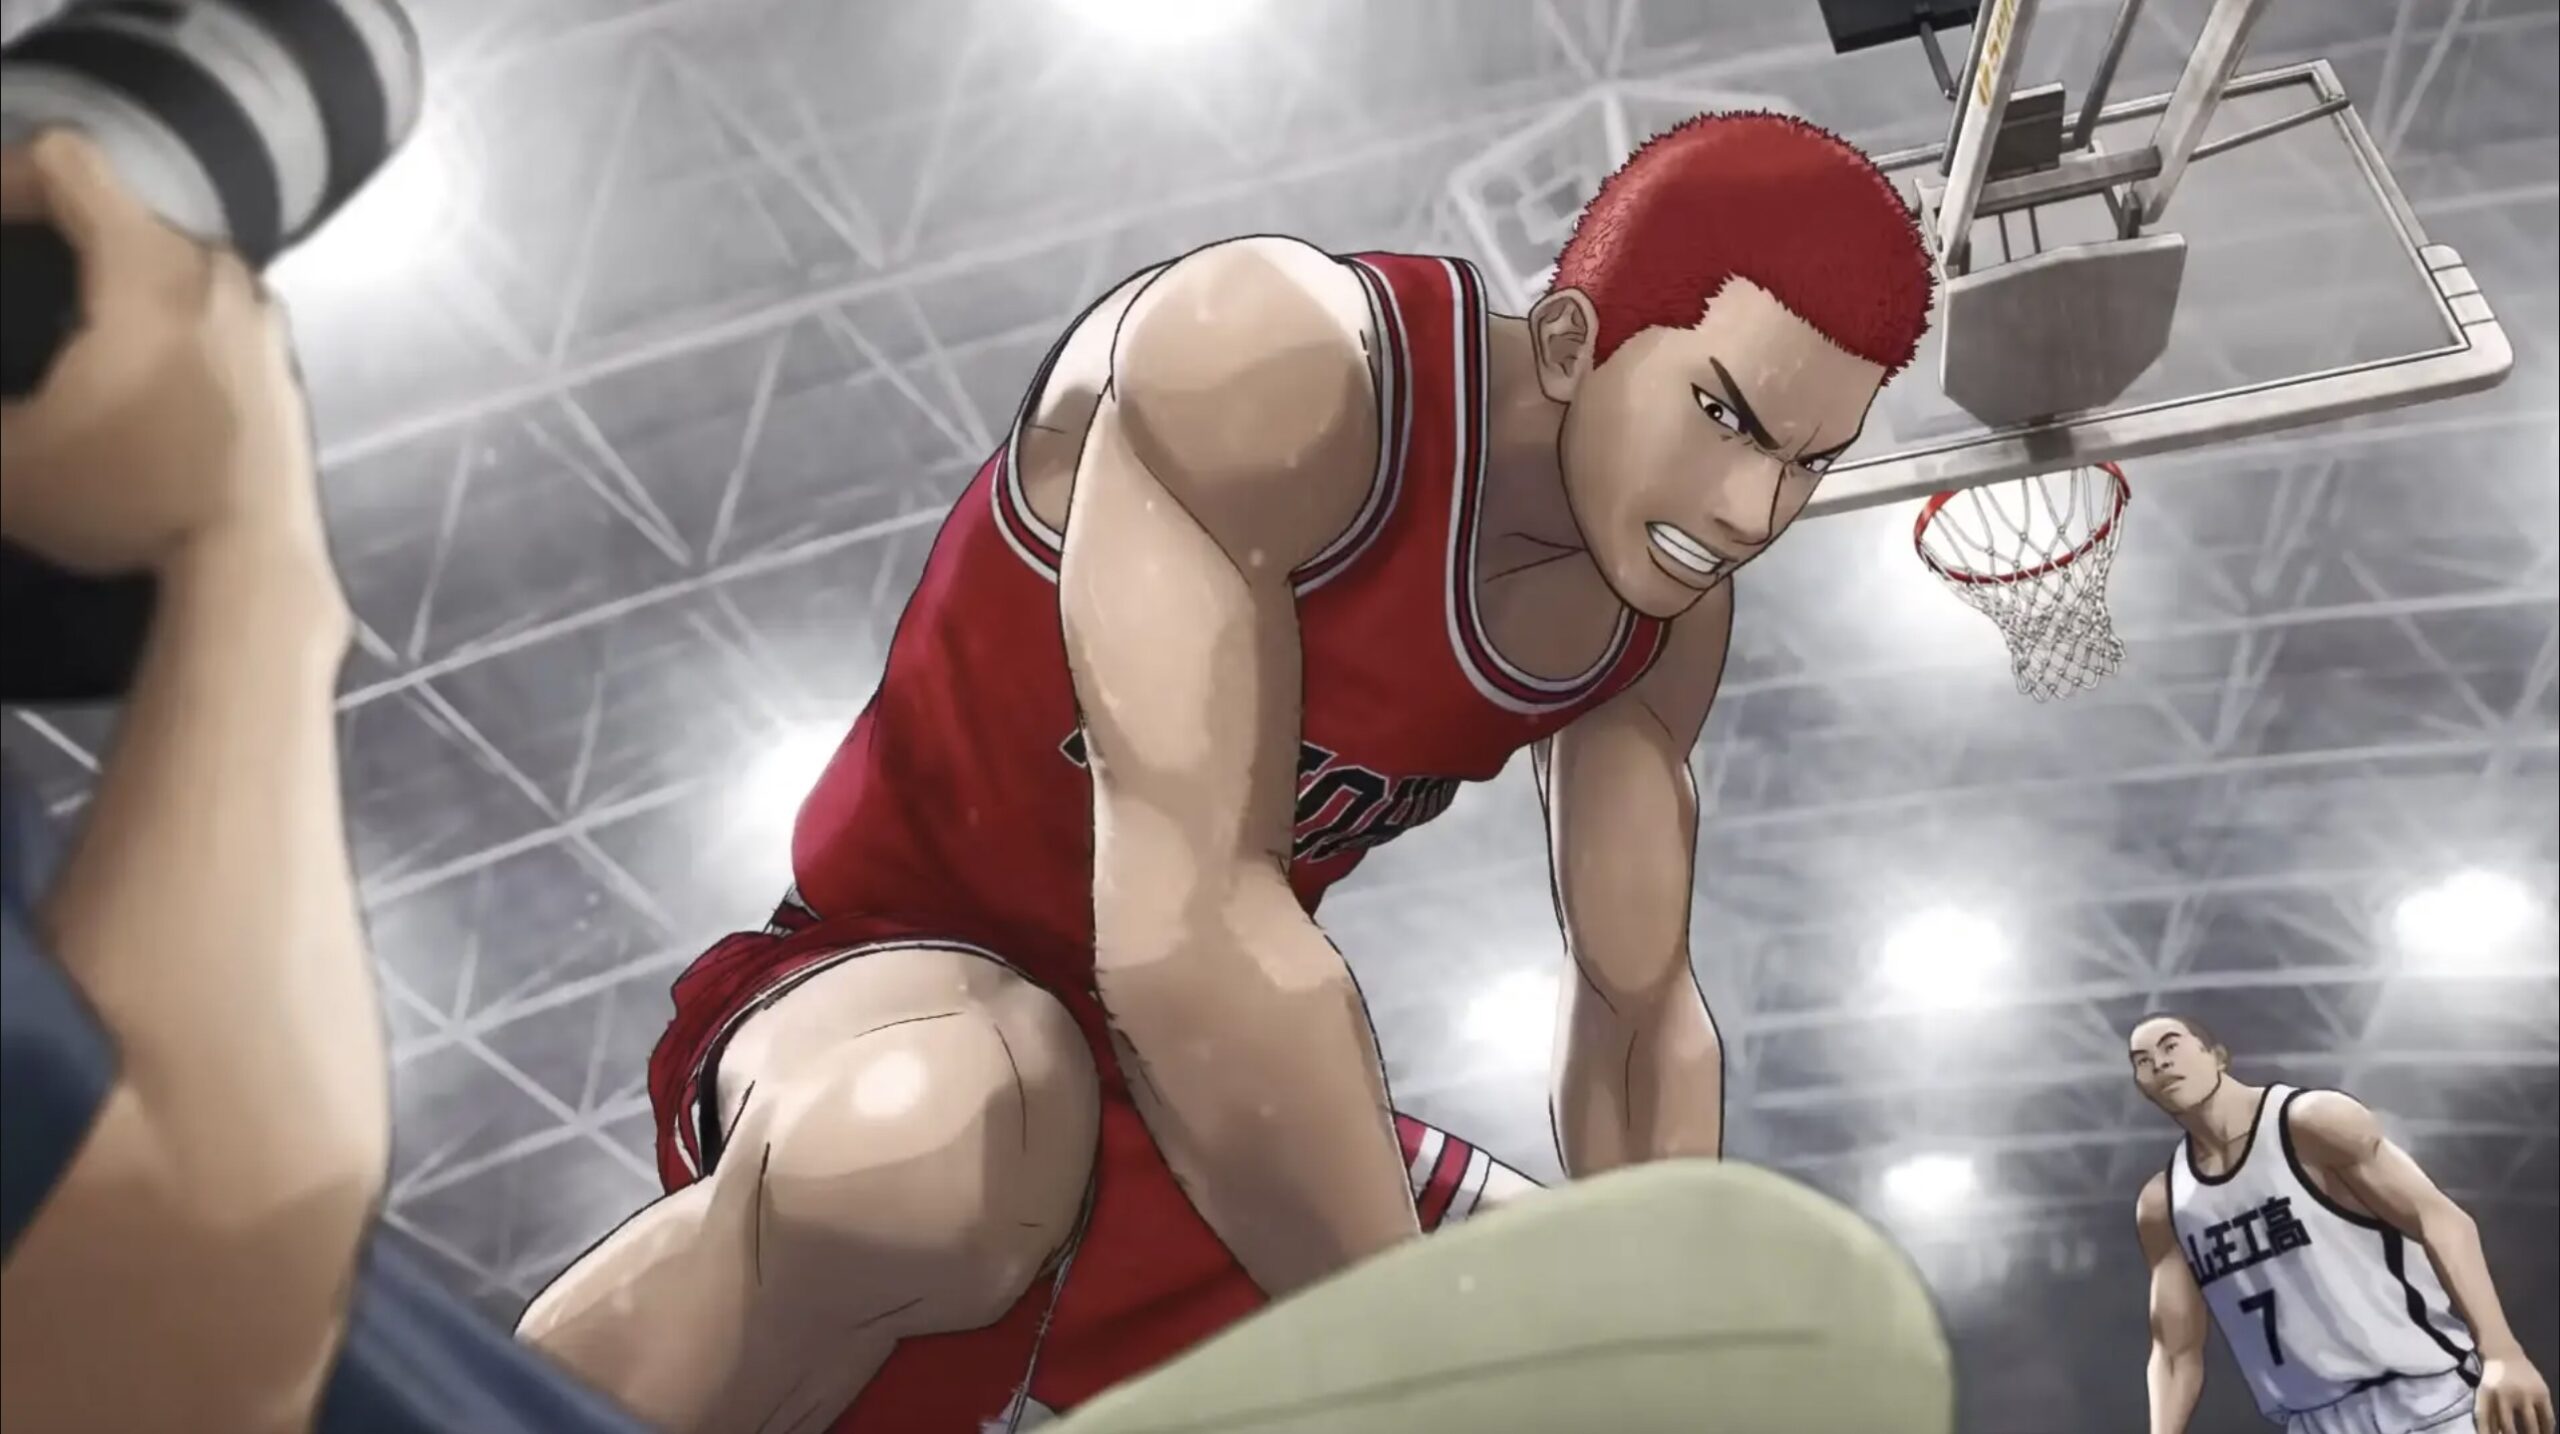 The Movie THE FIRST SLAM DUNK